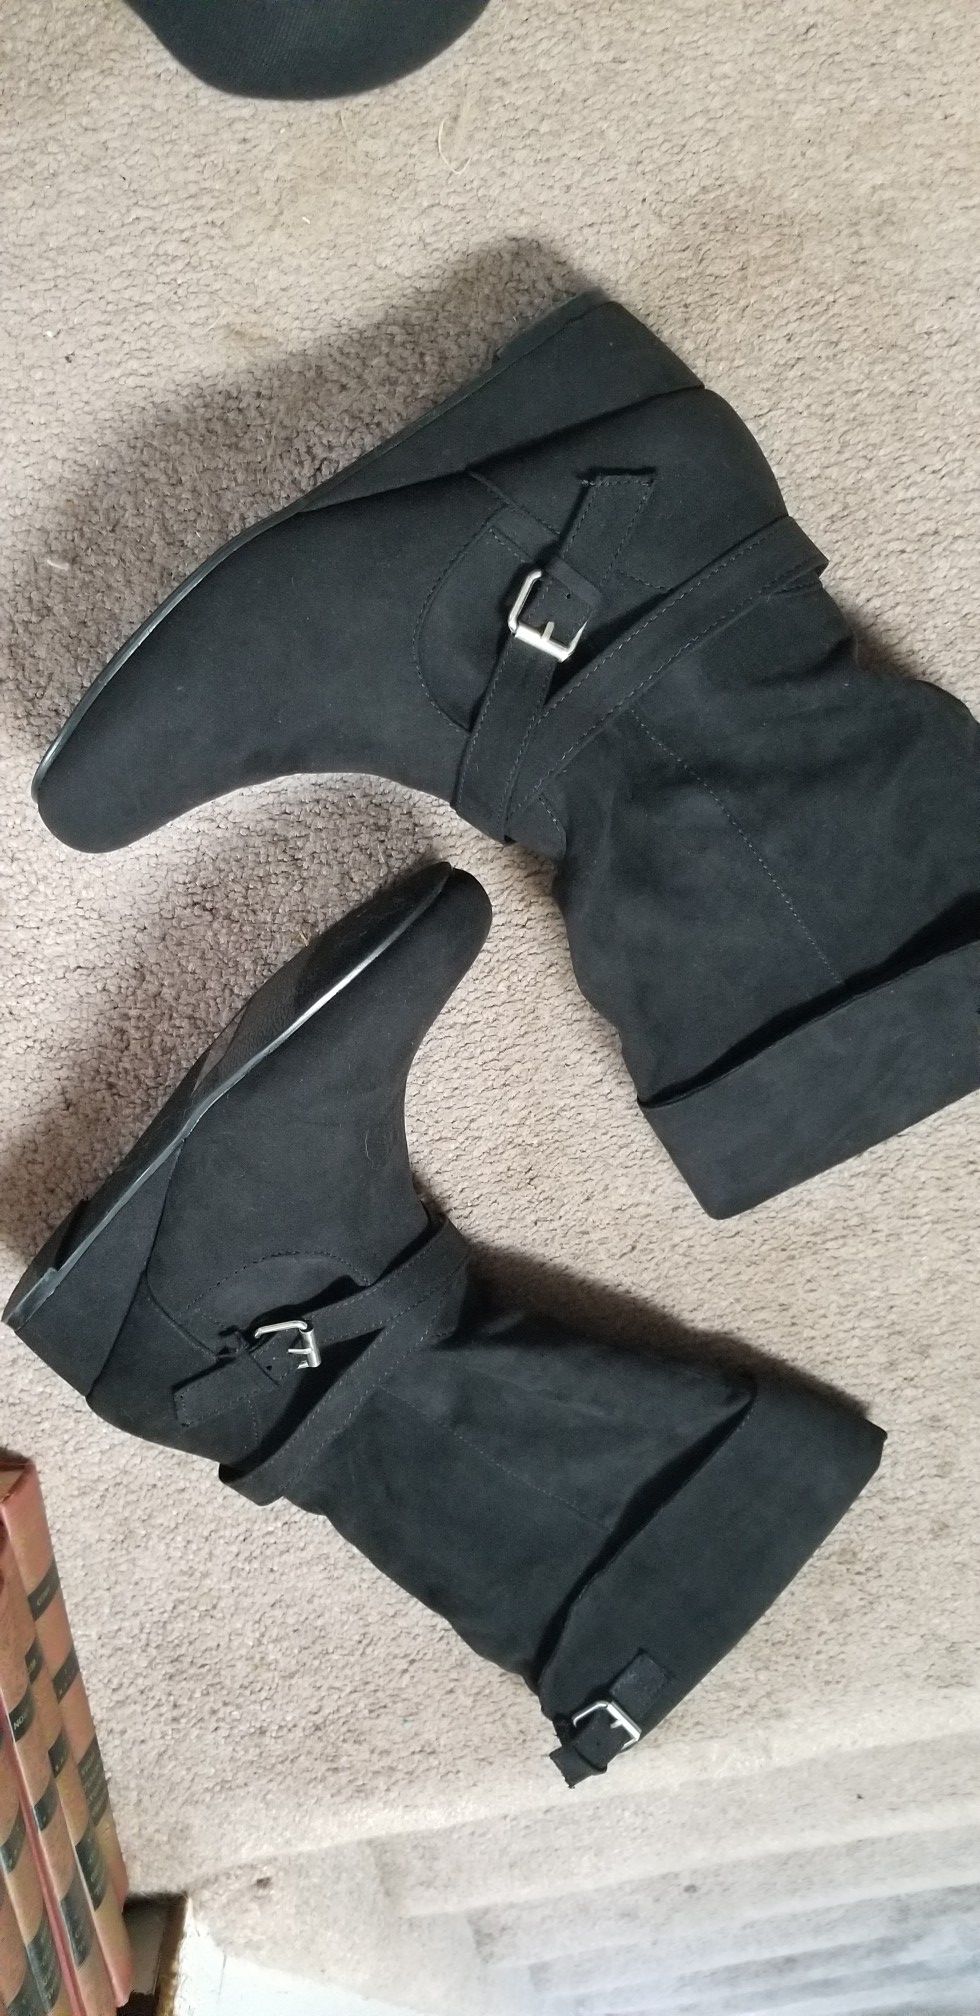 Size 5 women's boots